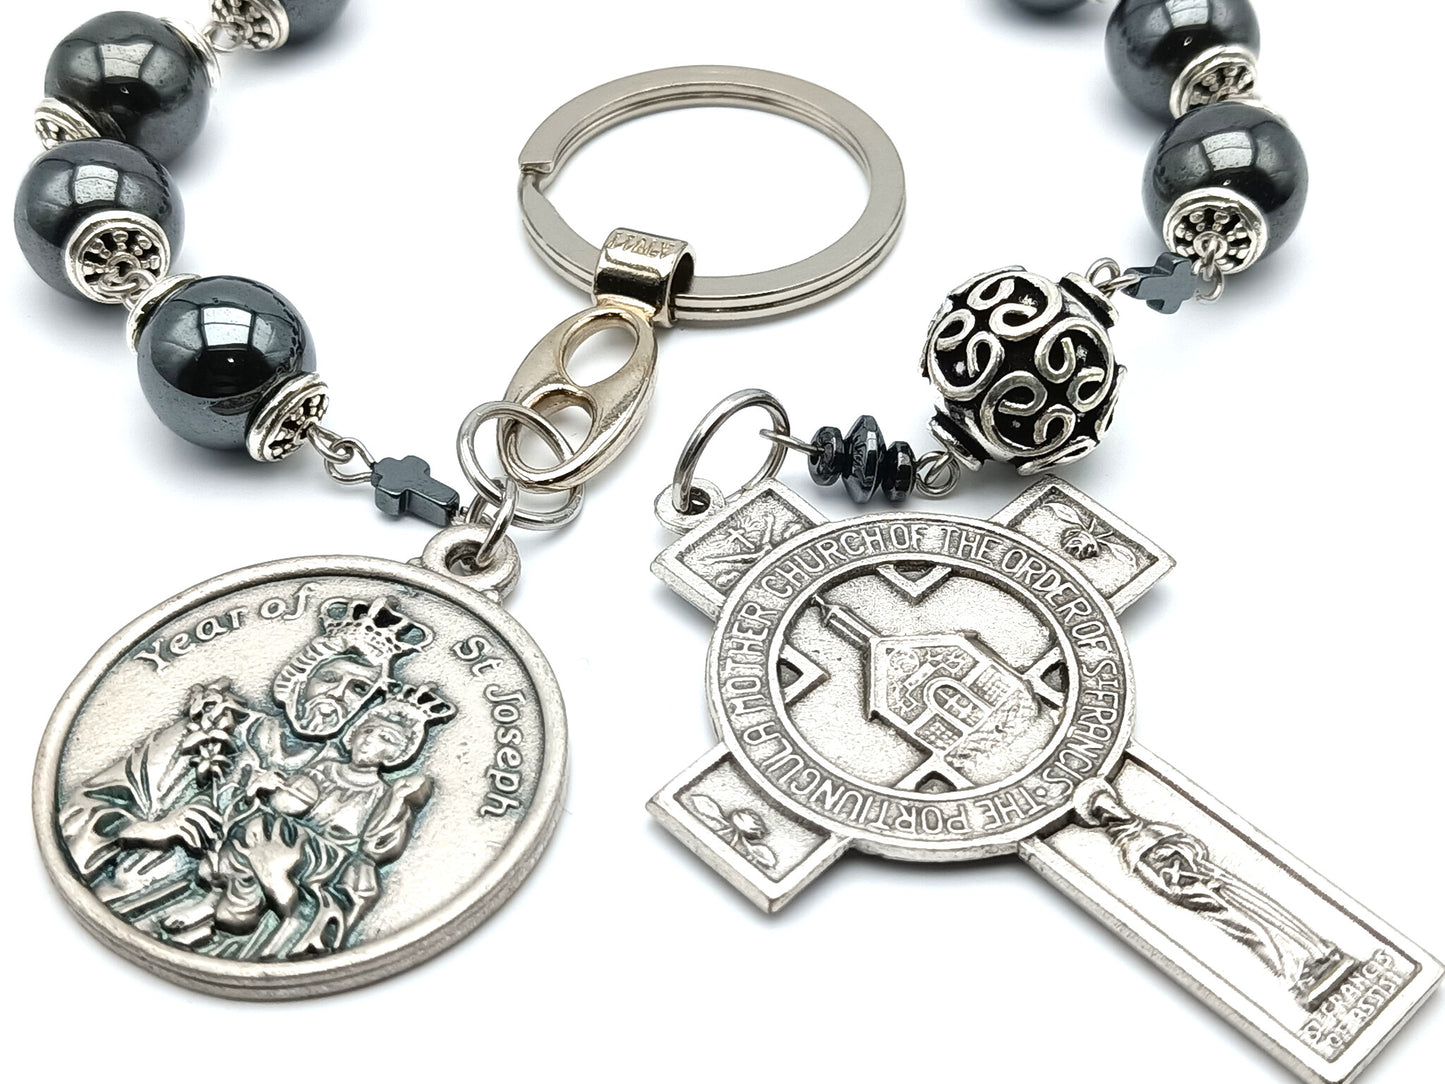 Year of Saint Joseph unique rosary beads decade rosary with hematite beads, silver Saint Francis crucifix and Saint Joseph medal.